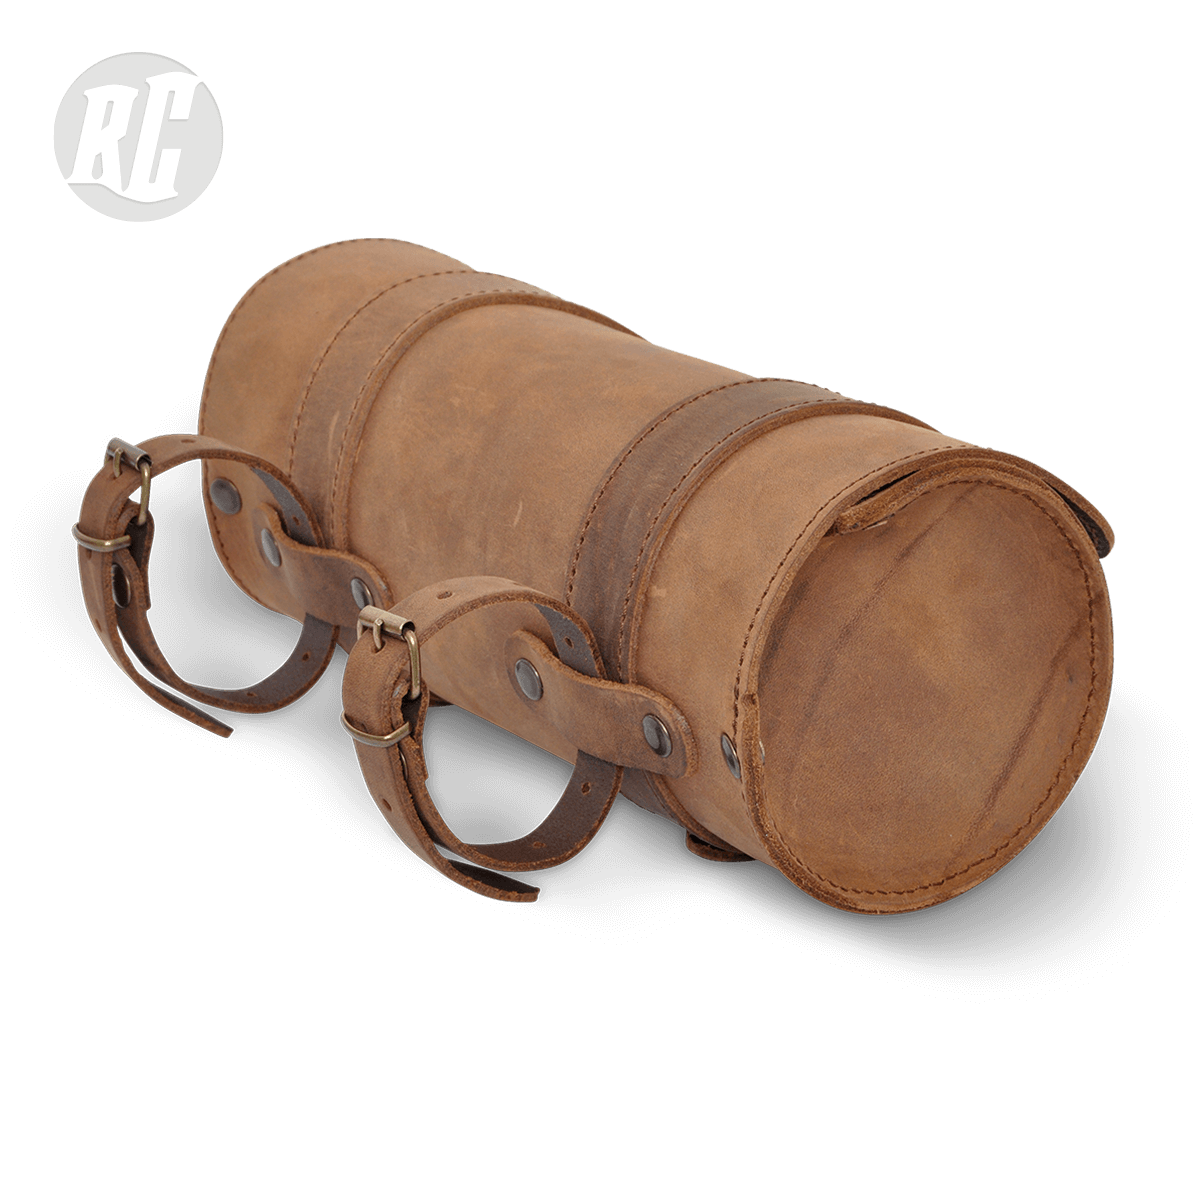 RUFF CYCLES Leather Tool bag - brown